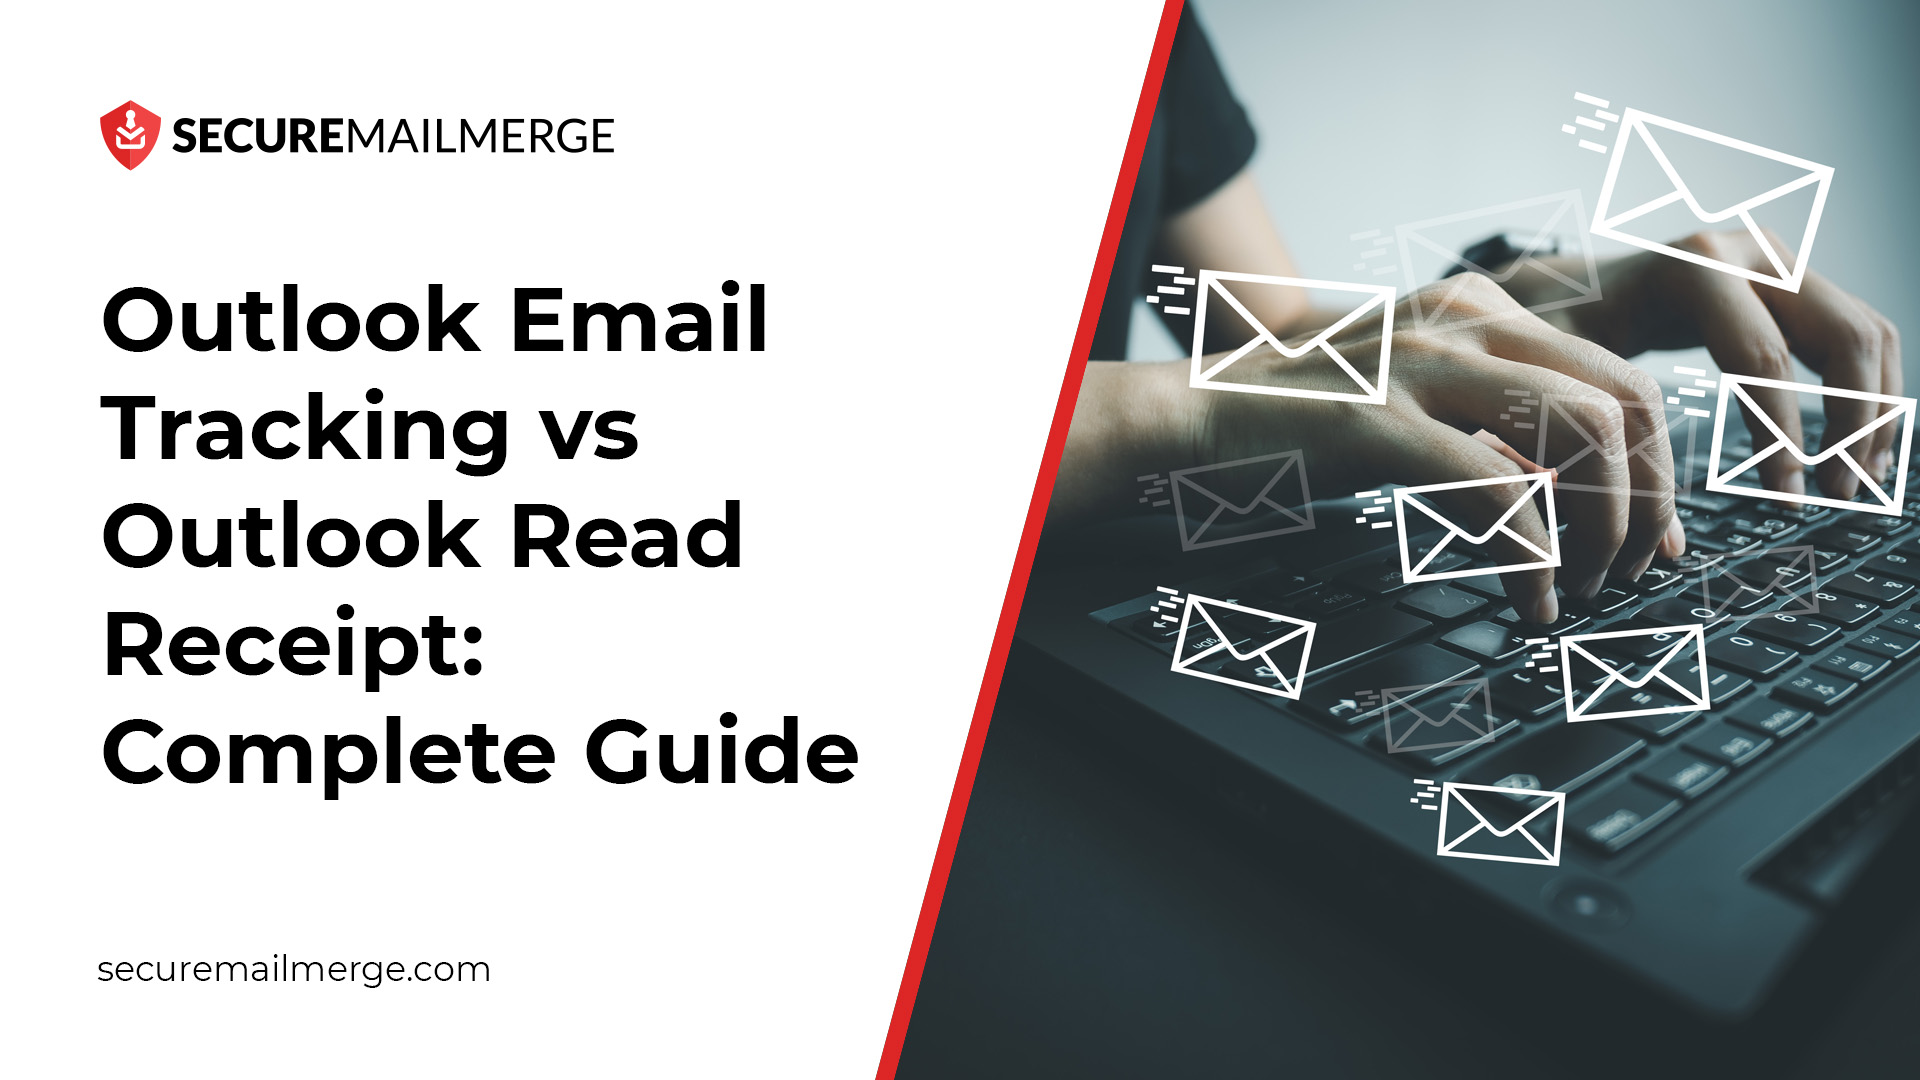 Outlook Email Tracking vs Outlook Read Receipt: Complete Guide